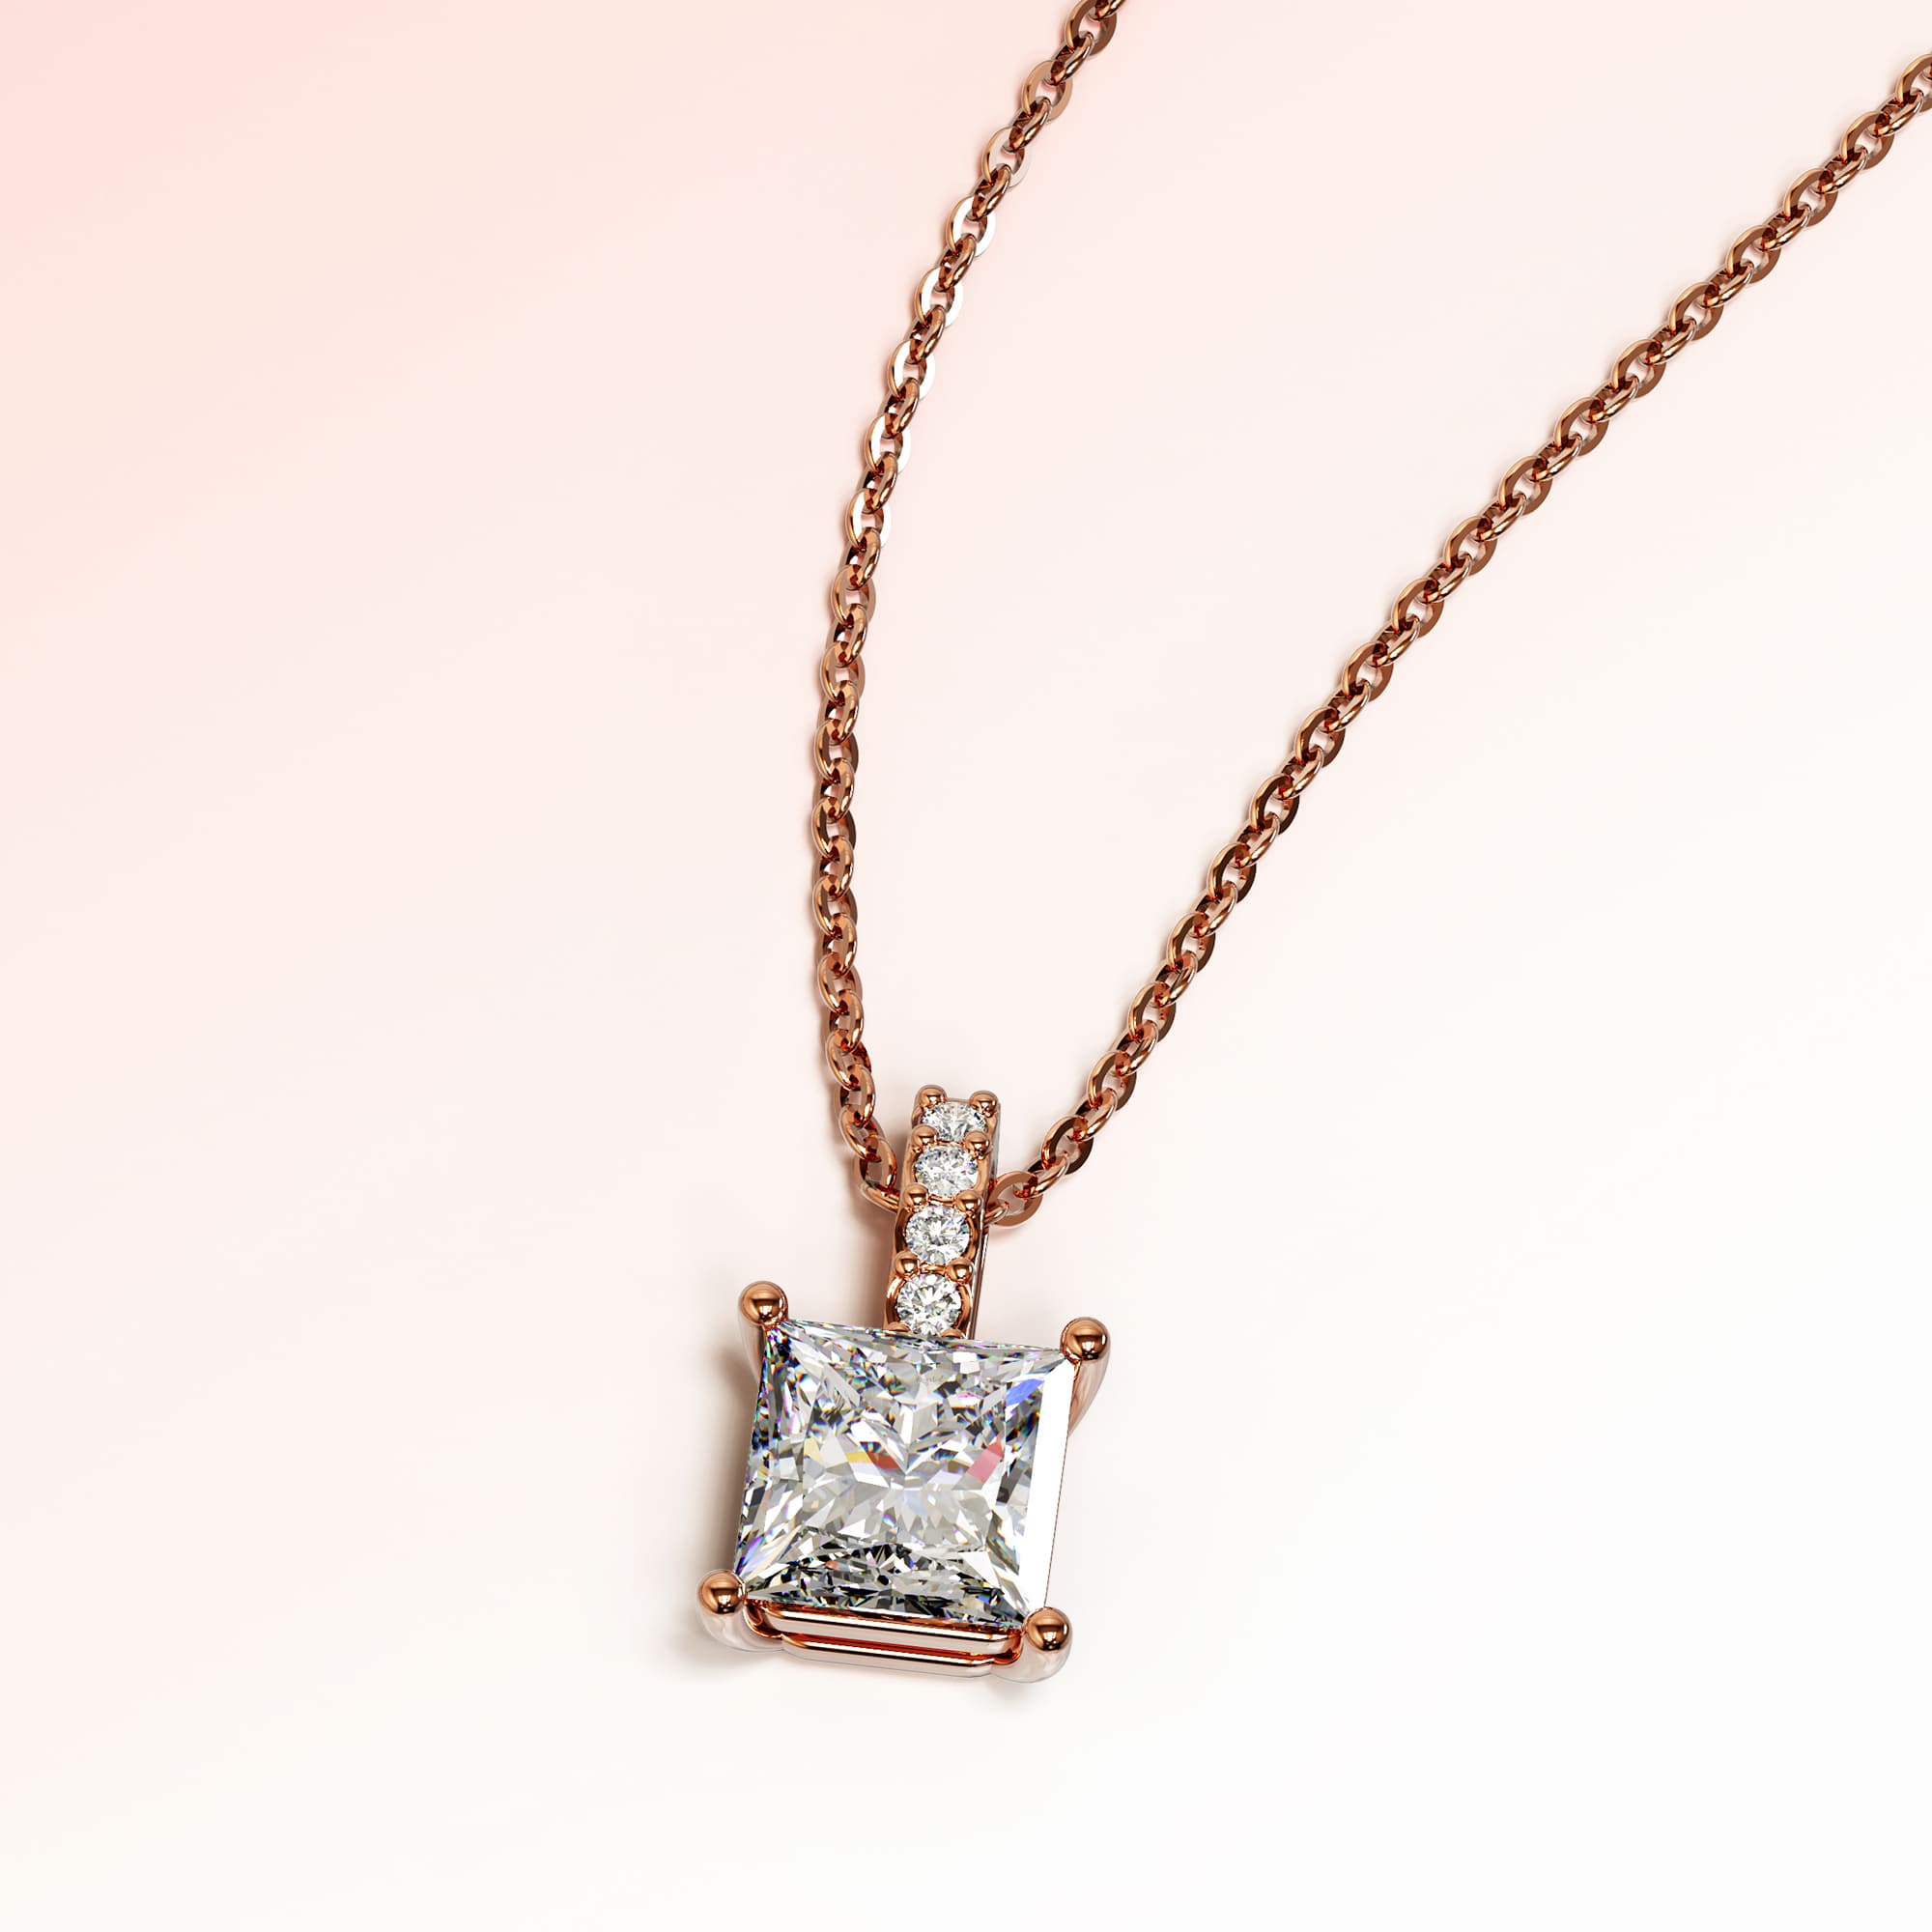 The Last Chance Necklace Embellished With SWAROVSKI® Crystals